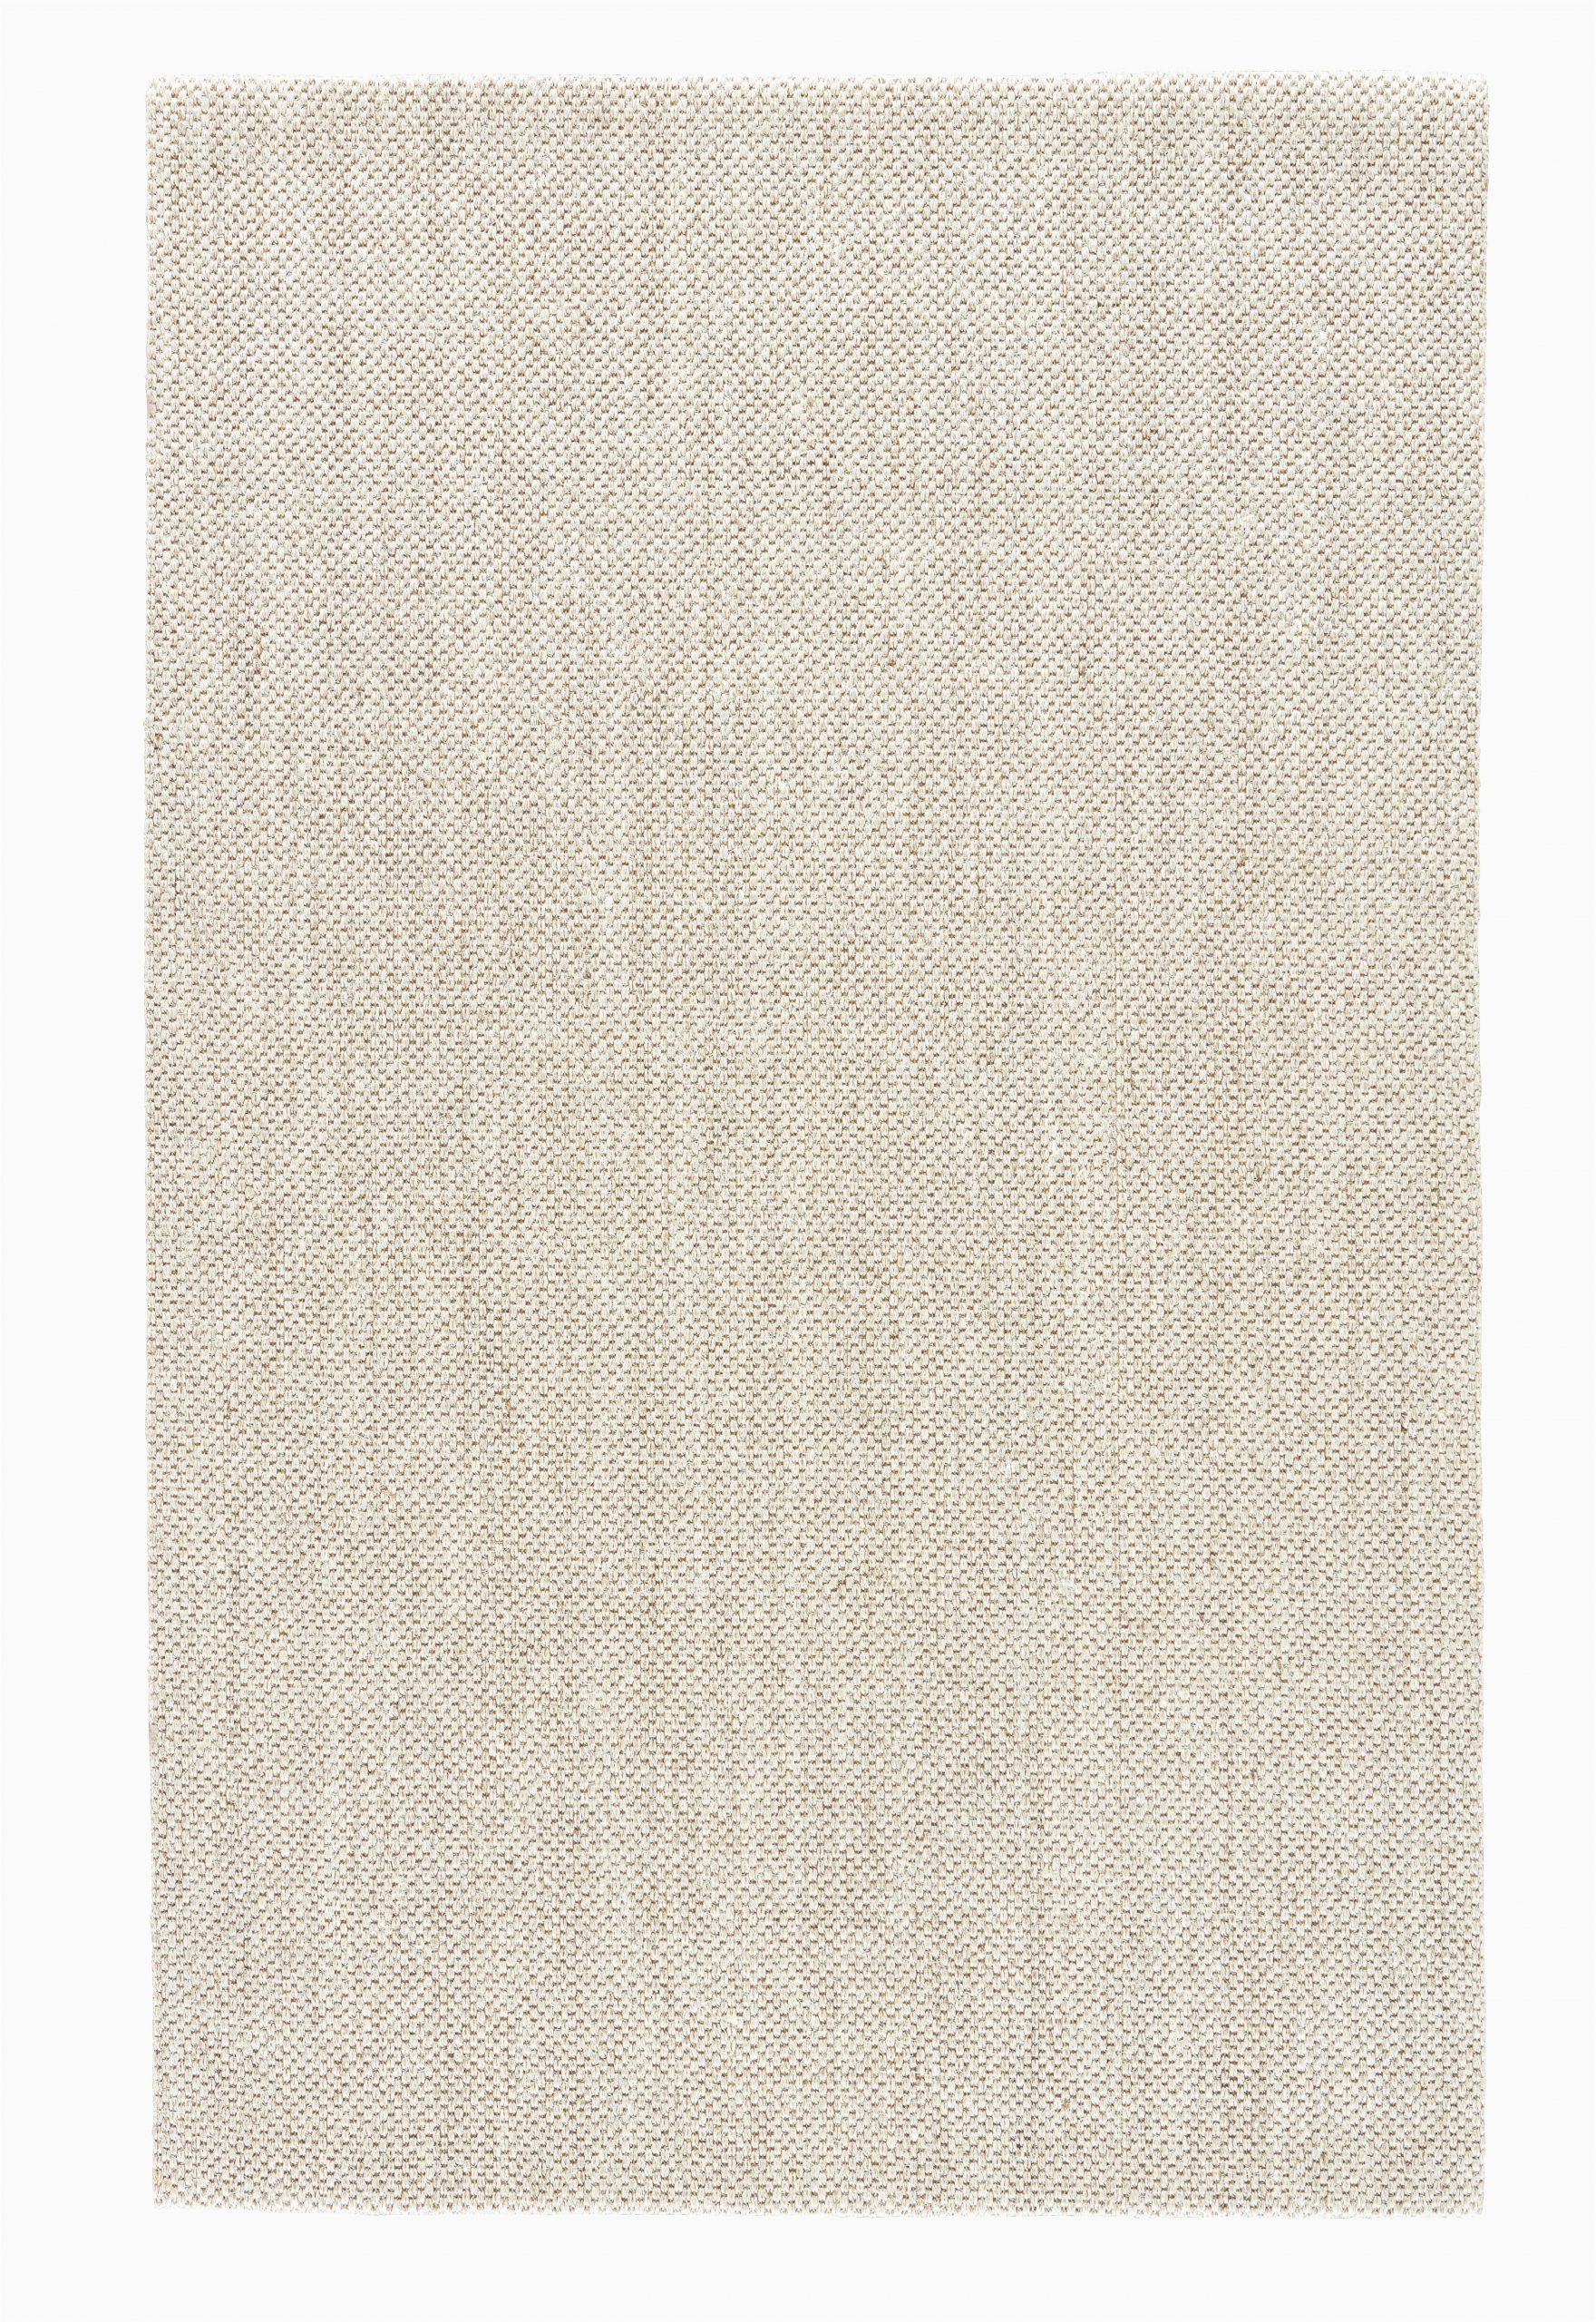 Home Decorators Calypso area Rug Our Billie Rug Has A Woven Texture but A Little More Refined